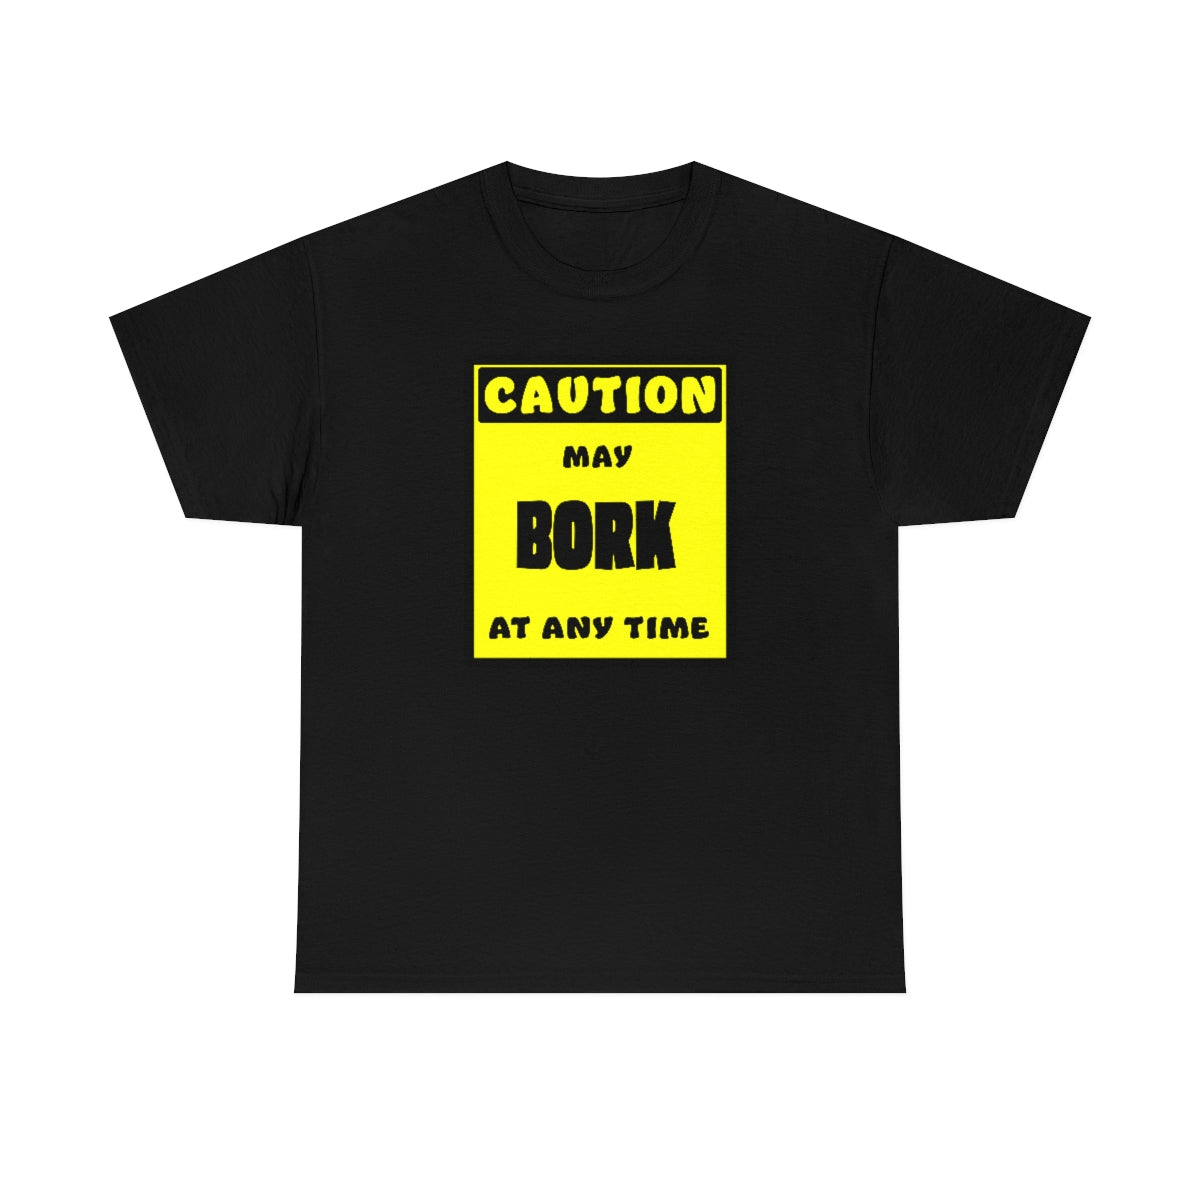 CAUTION! May BORK at any time! - T-Shirt T-Shirt AFLT-Whootorca Black S 